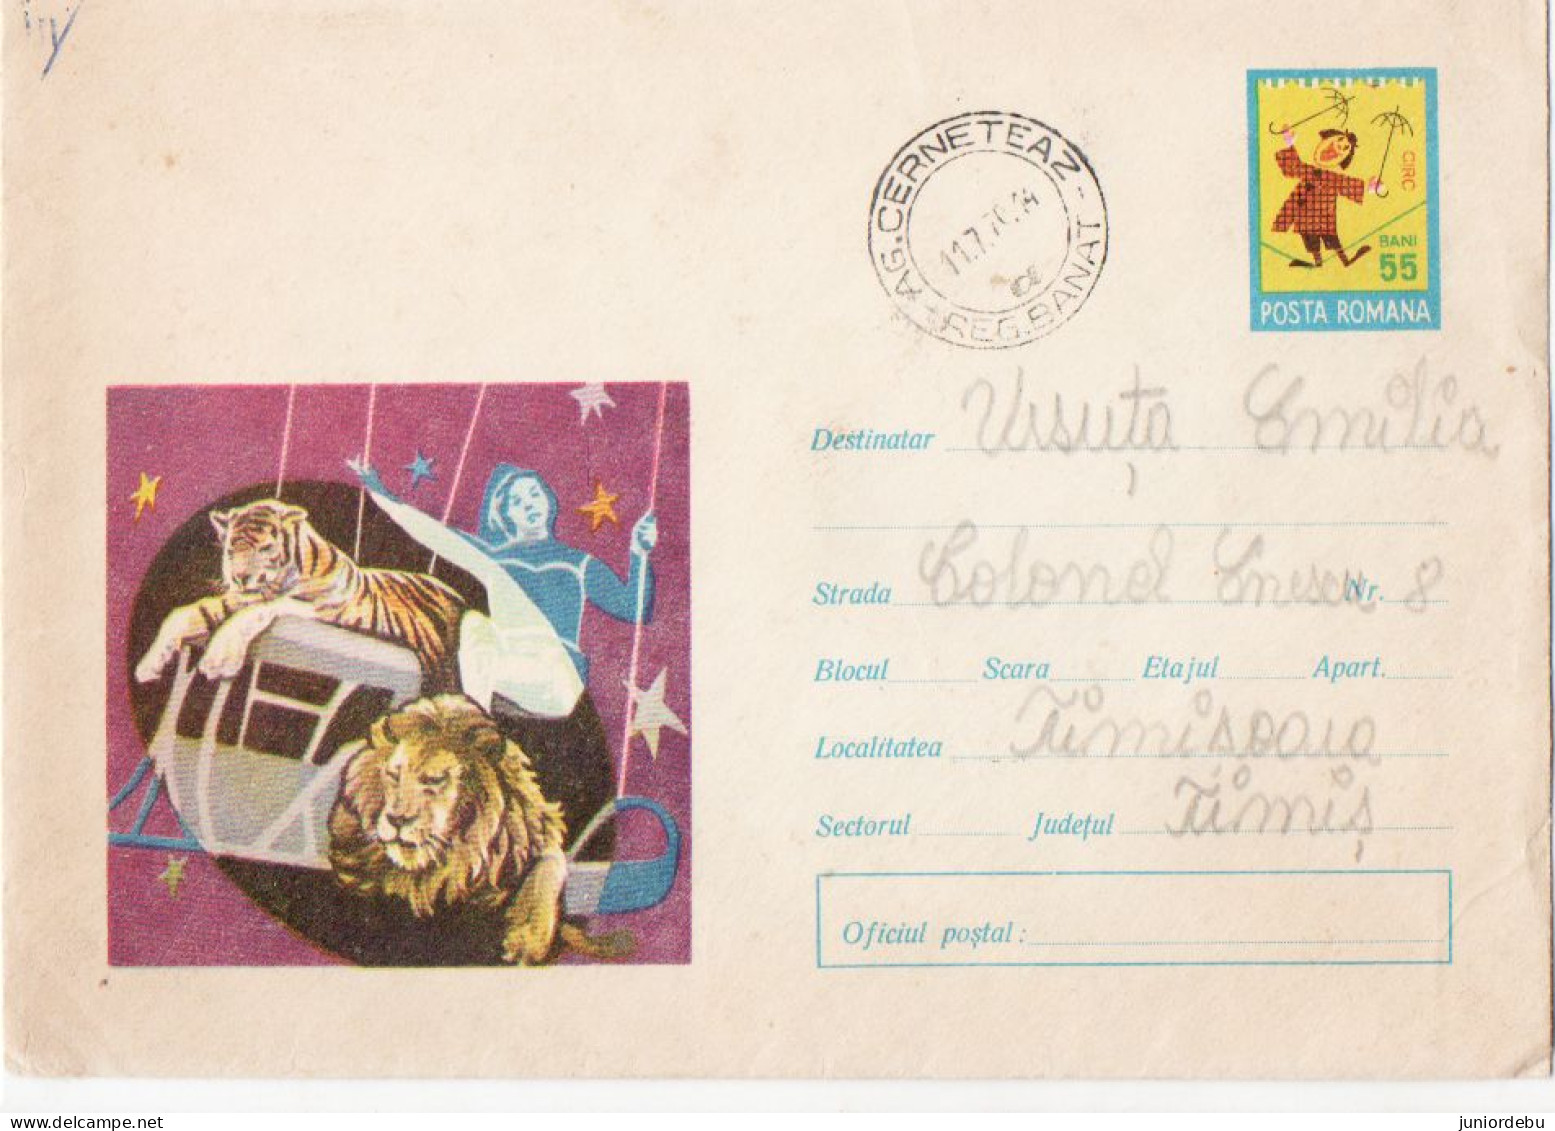 Romania - 1969  - Postal Stationery Cover  - Clown - Used. - Covers & Documents